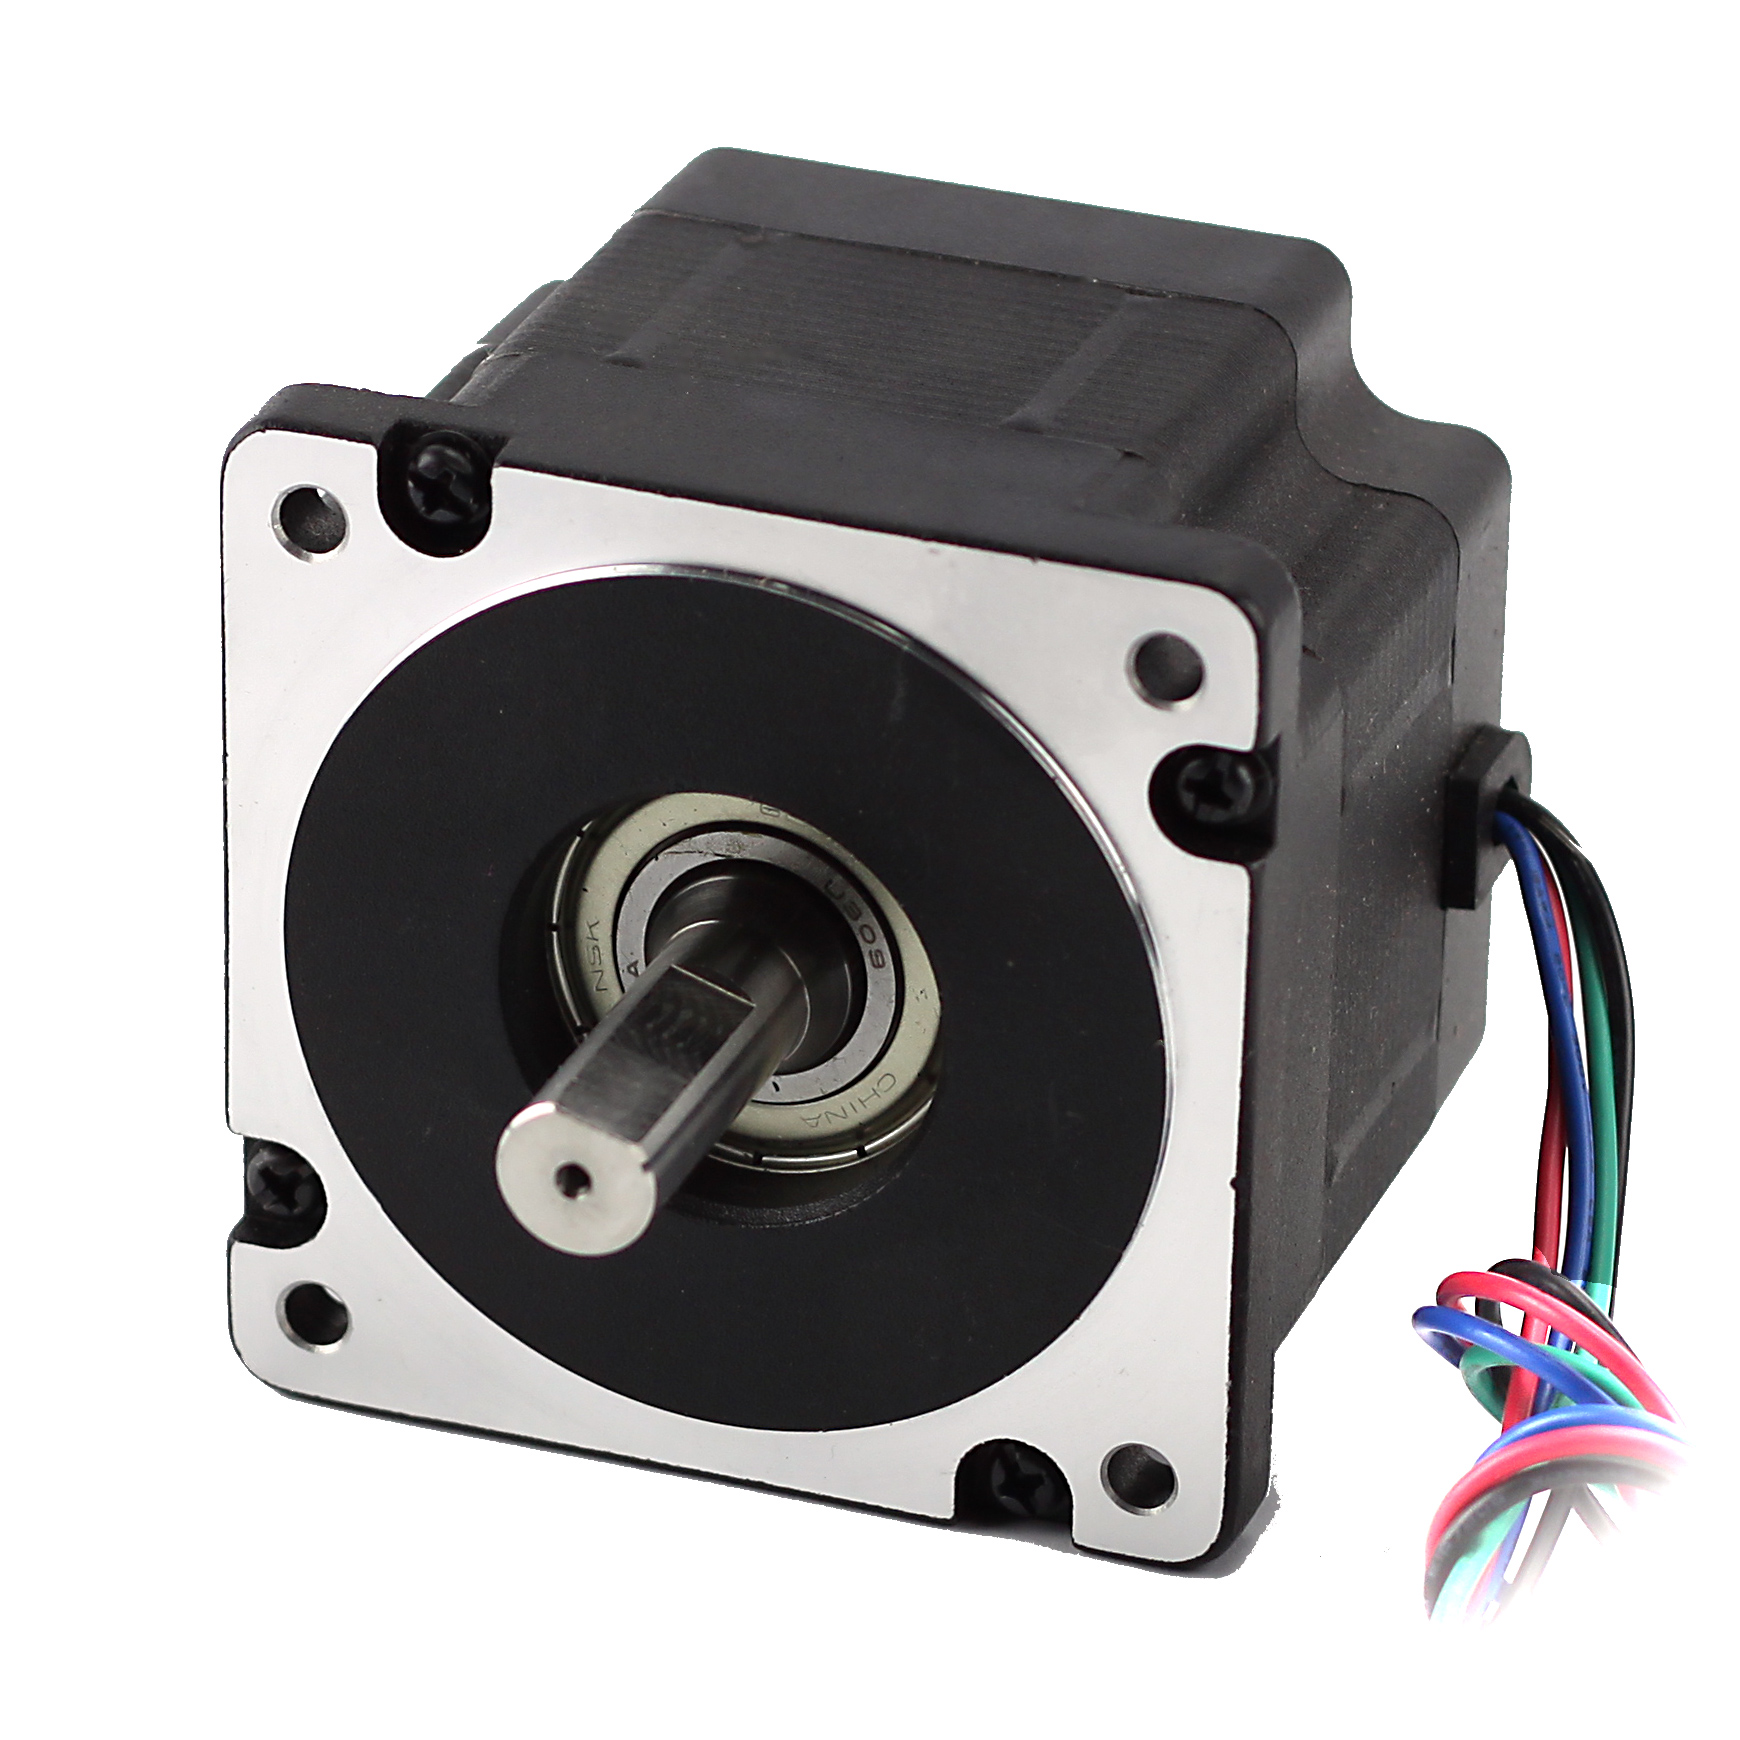 KL34H2120-60-4AC 1200oz/in 6amp Single Shaft NEMA34 Stepper Motor with cable 